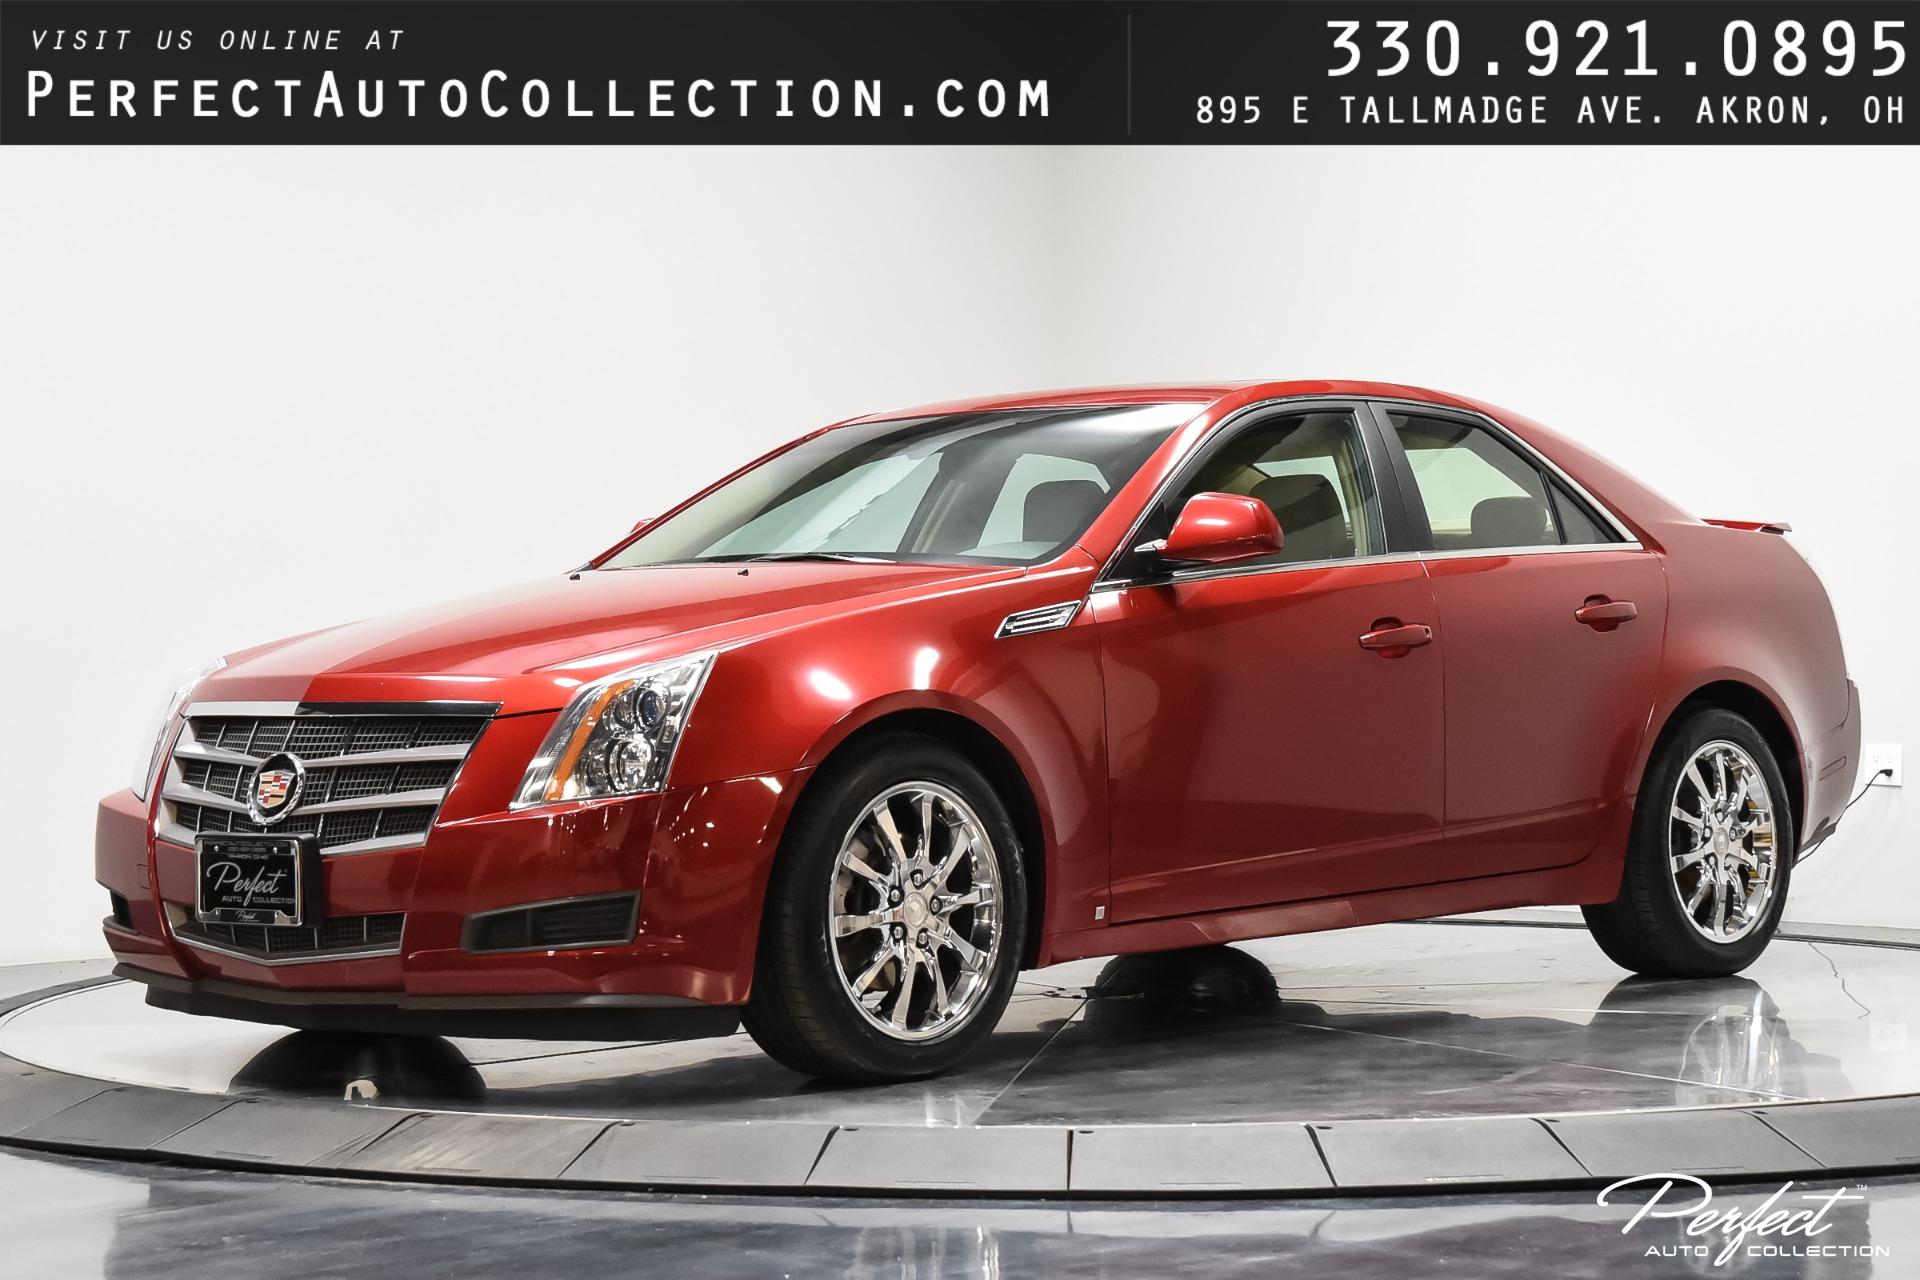 Used 2009 Cadillac CTS 3.6L V6 For Sale (Sold) | Perfect Auto ...